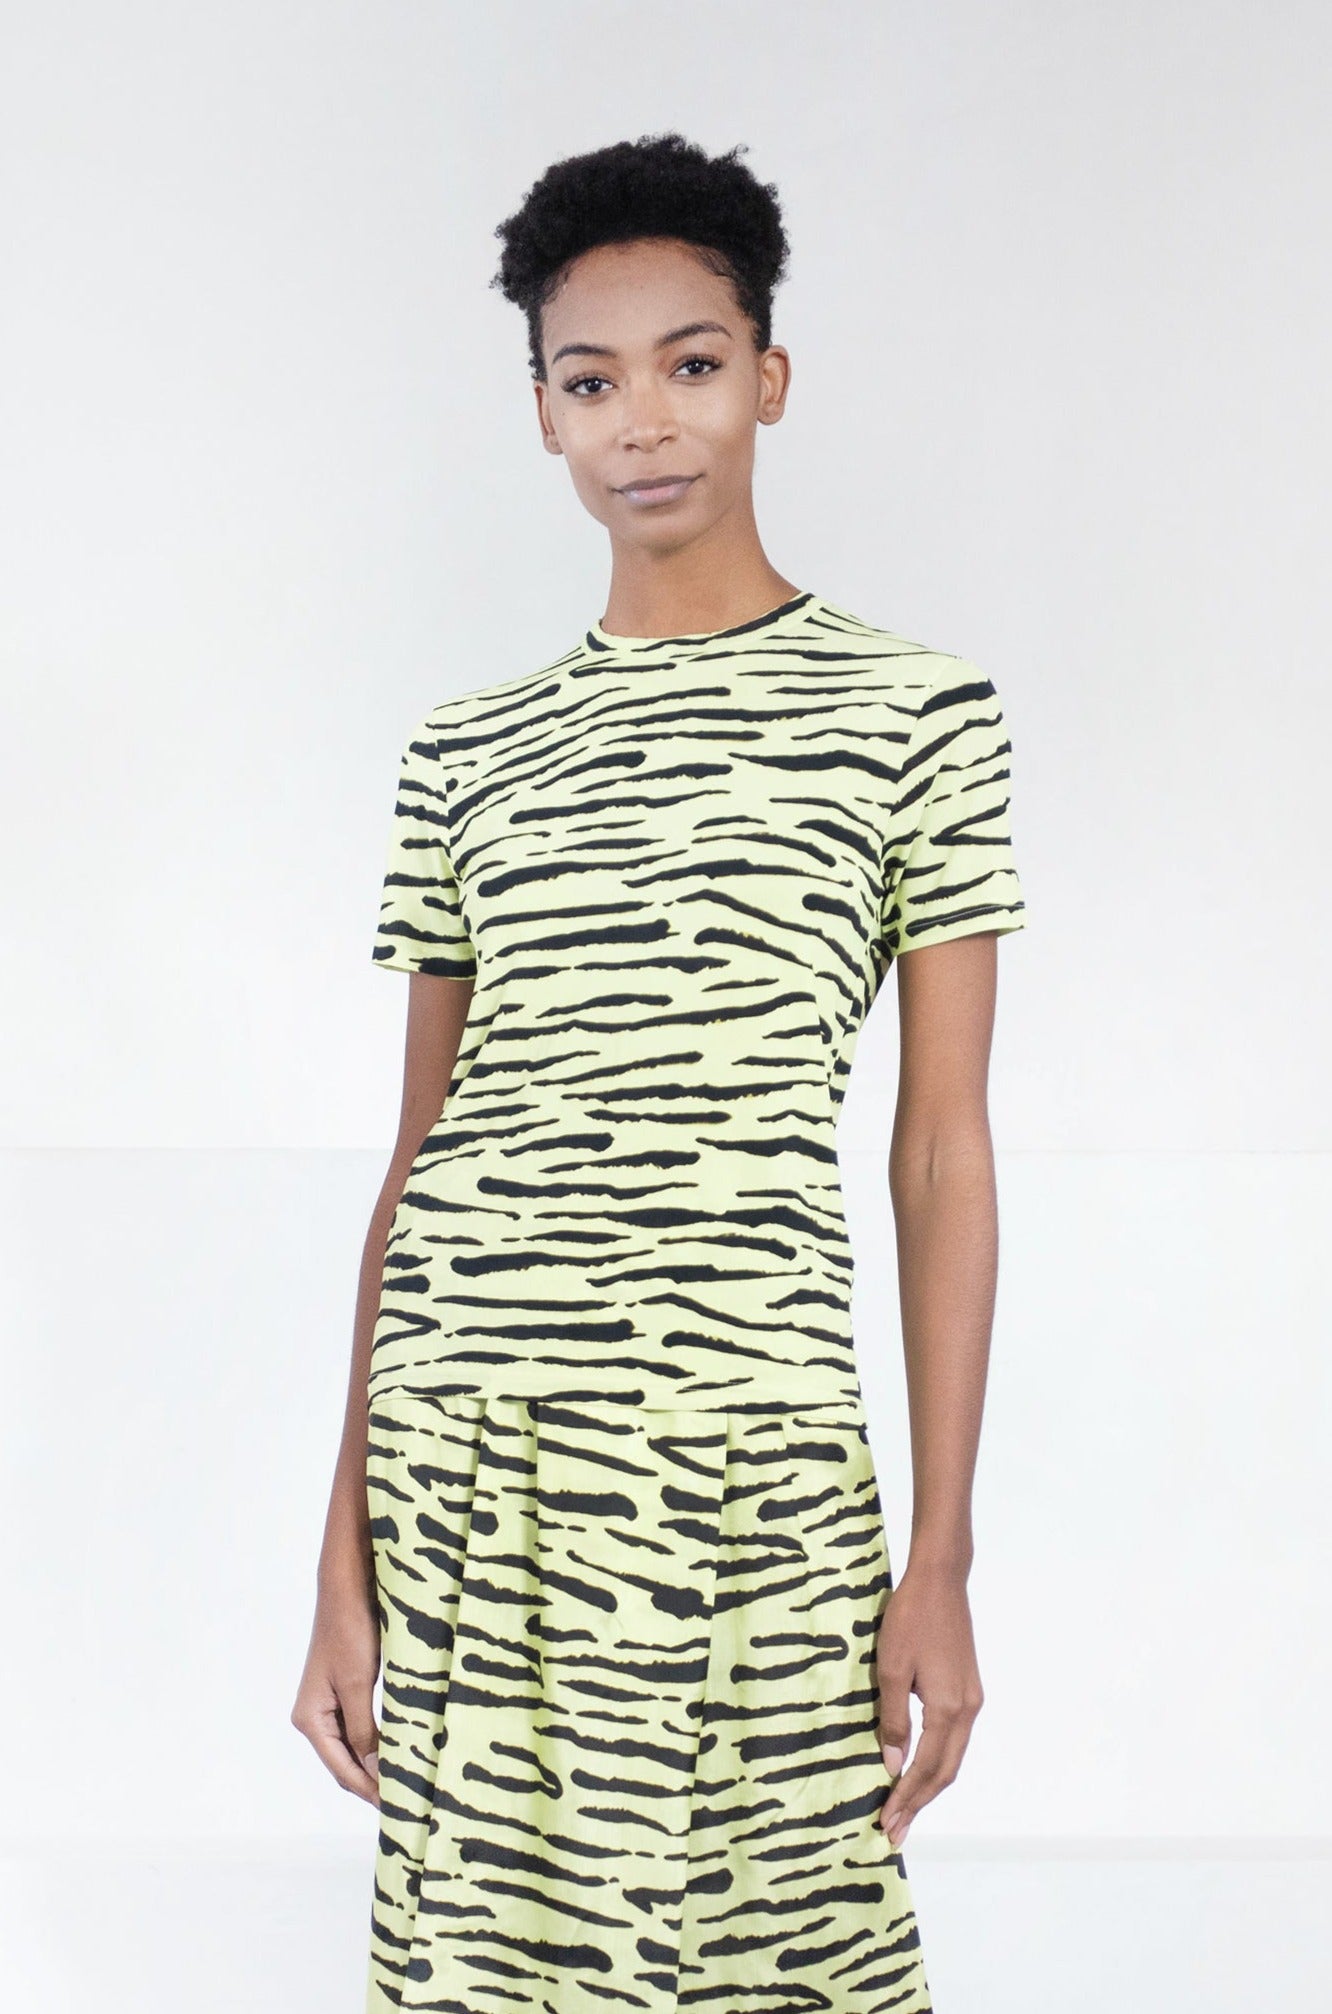 Christian Wijnants - Taddeo Short Sleeve Jersey Top, Lime Wild Stripes